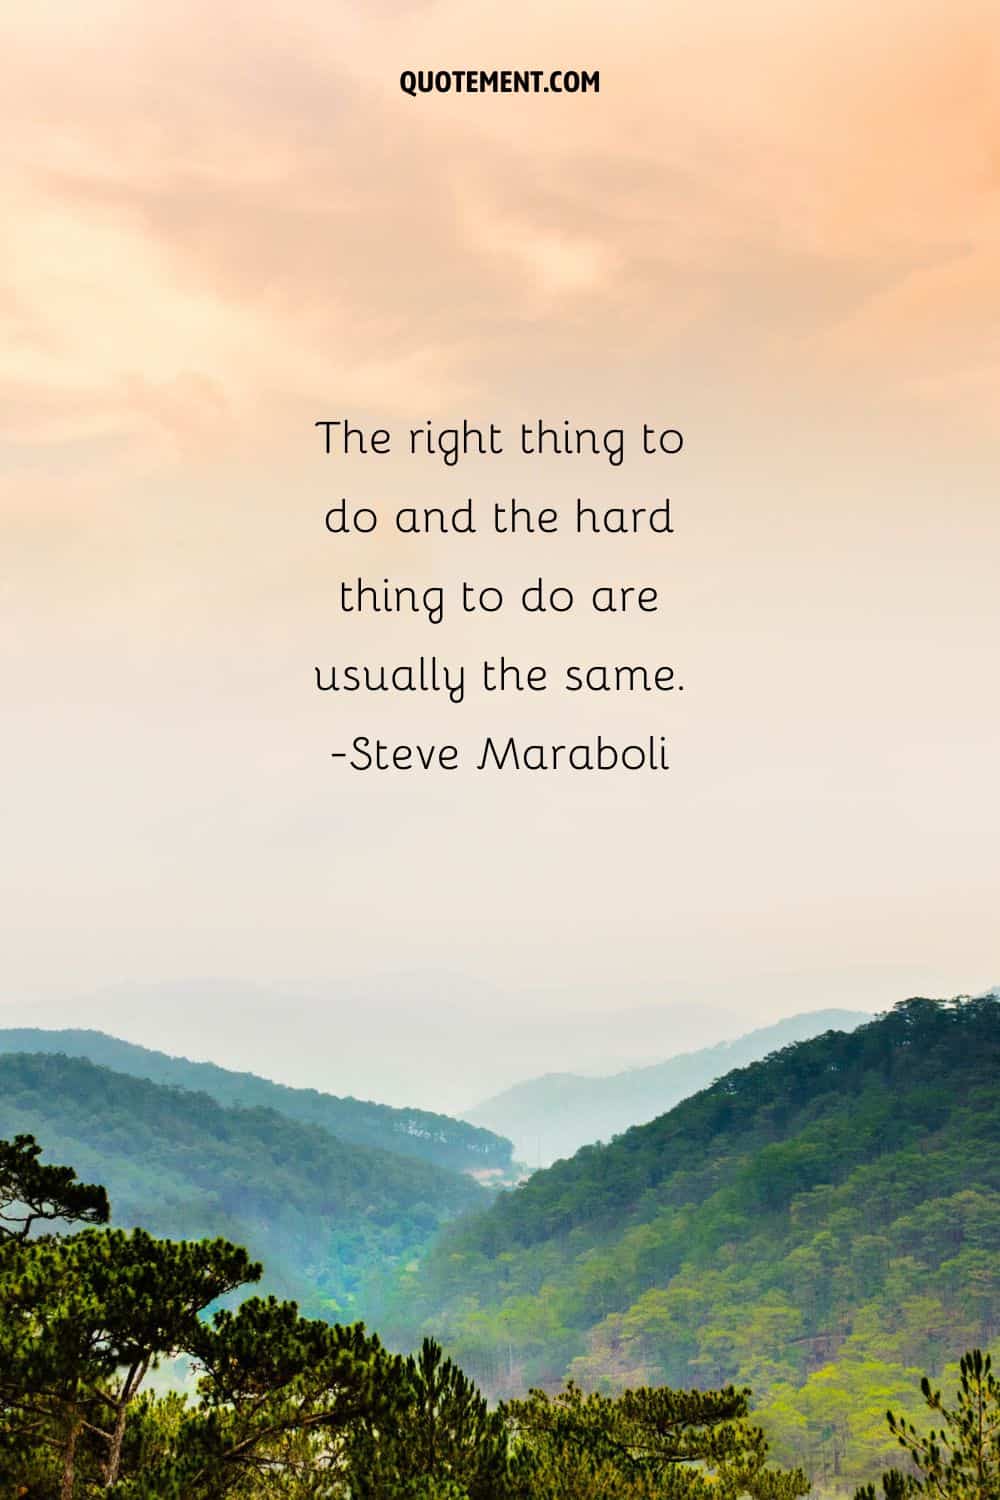 The right thing to do and the hard thing to do are usually the same